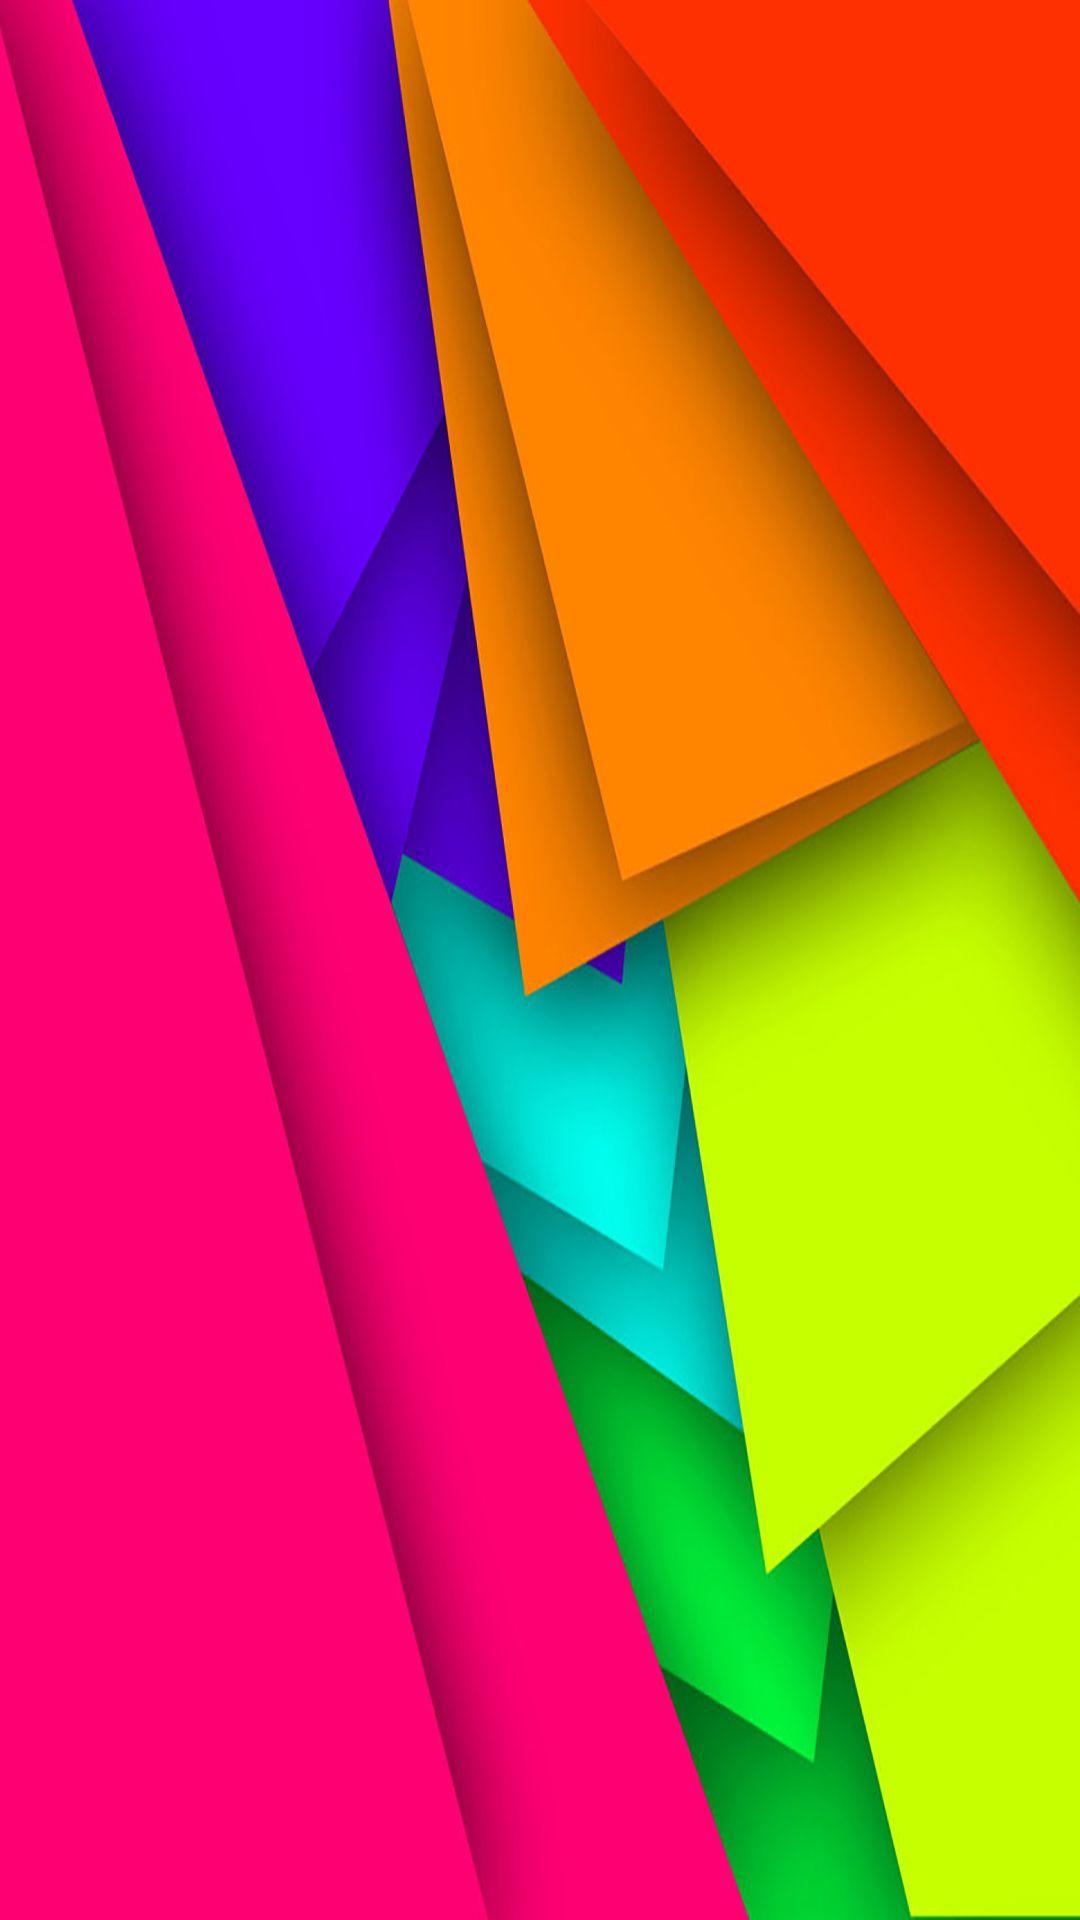 Bold Colorful Abstract Art Wallpaper. Geometric wallpaper iphone